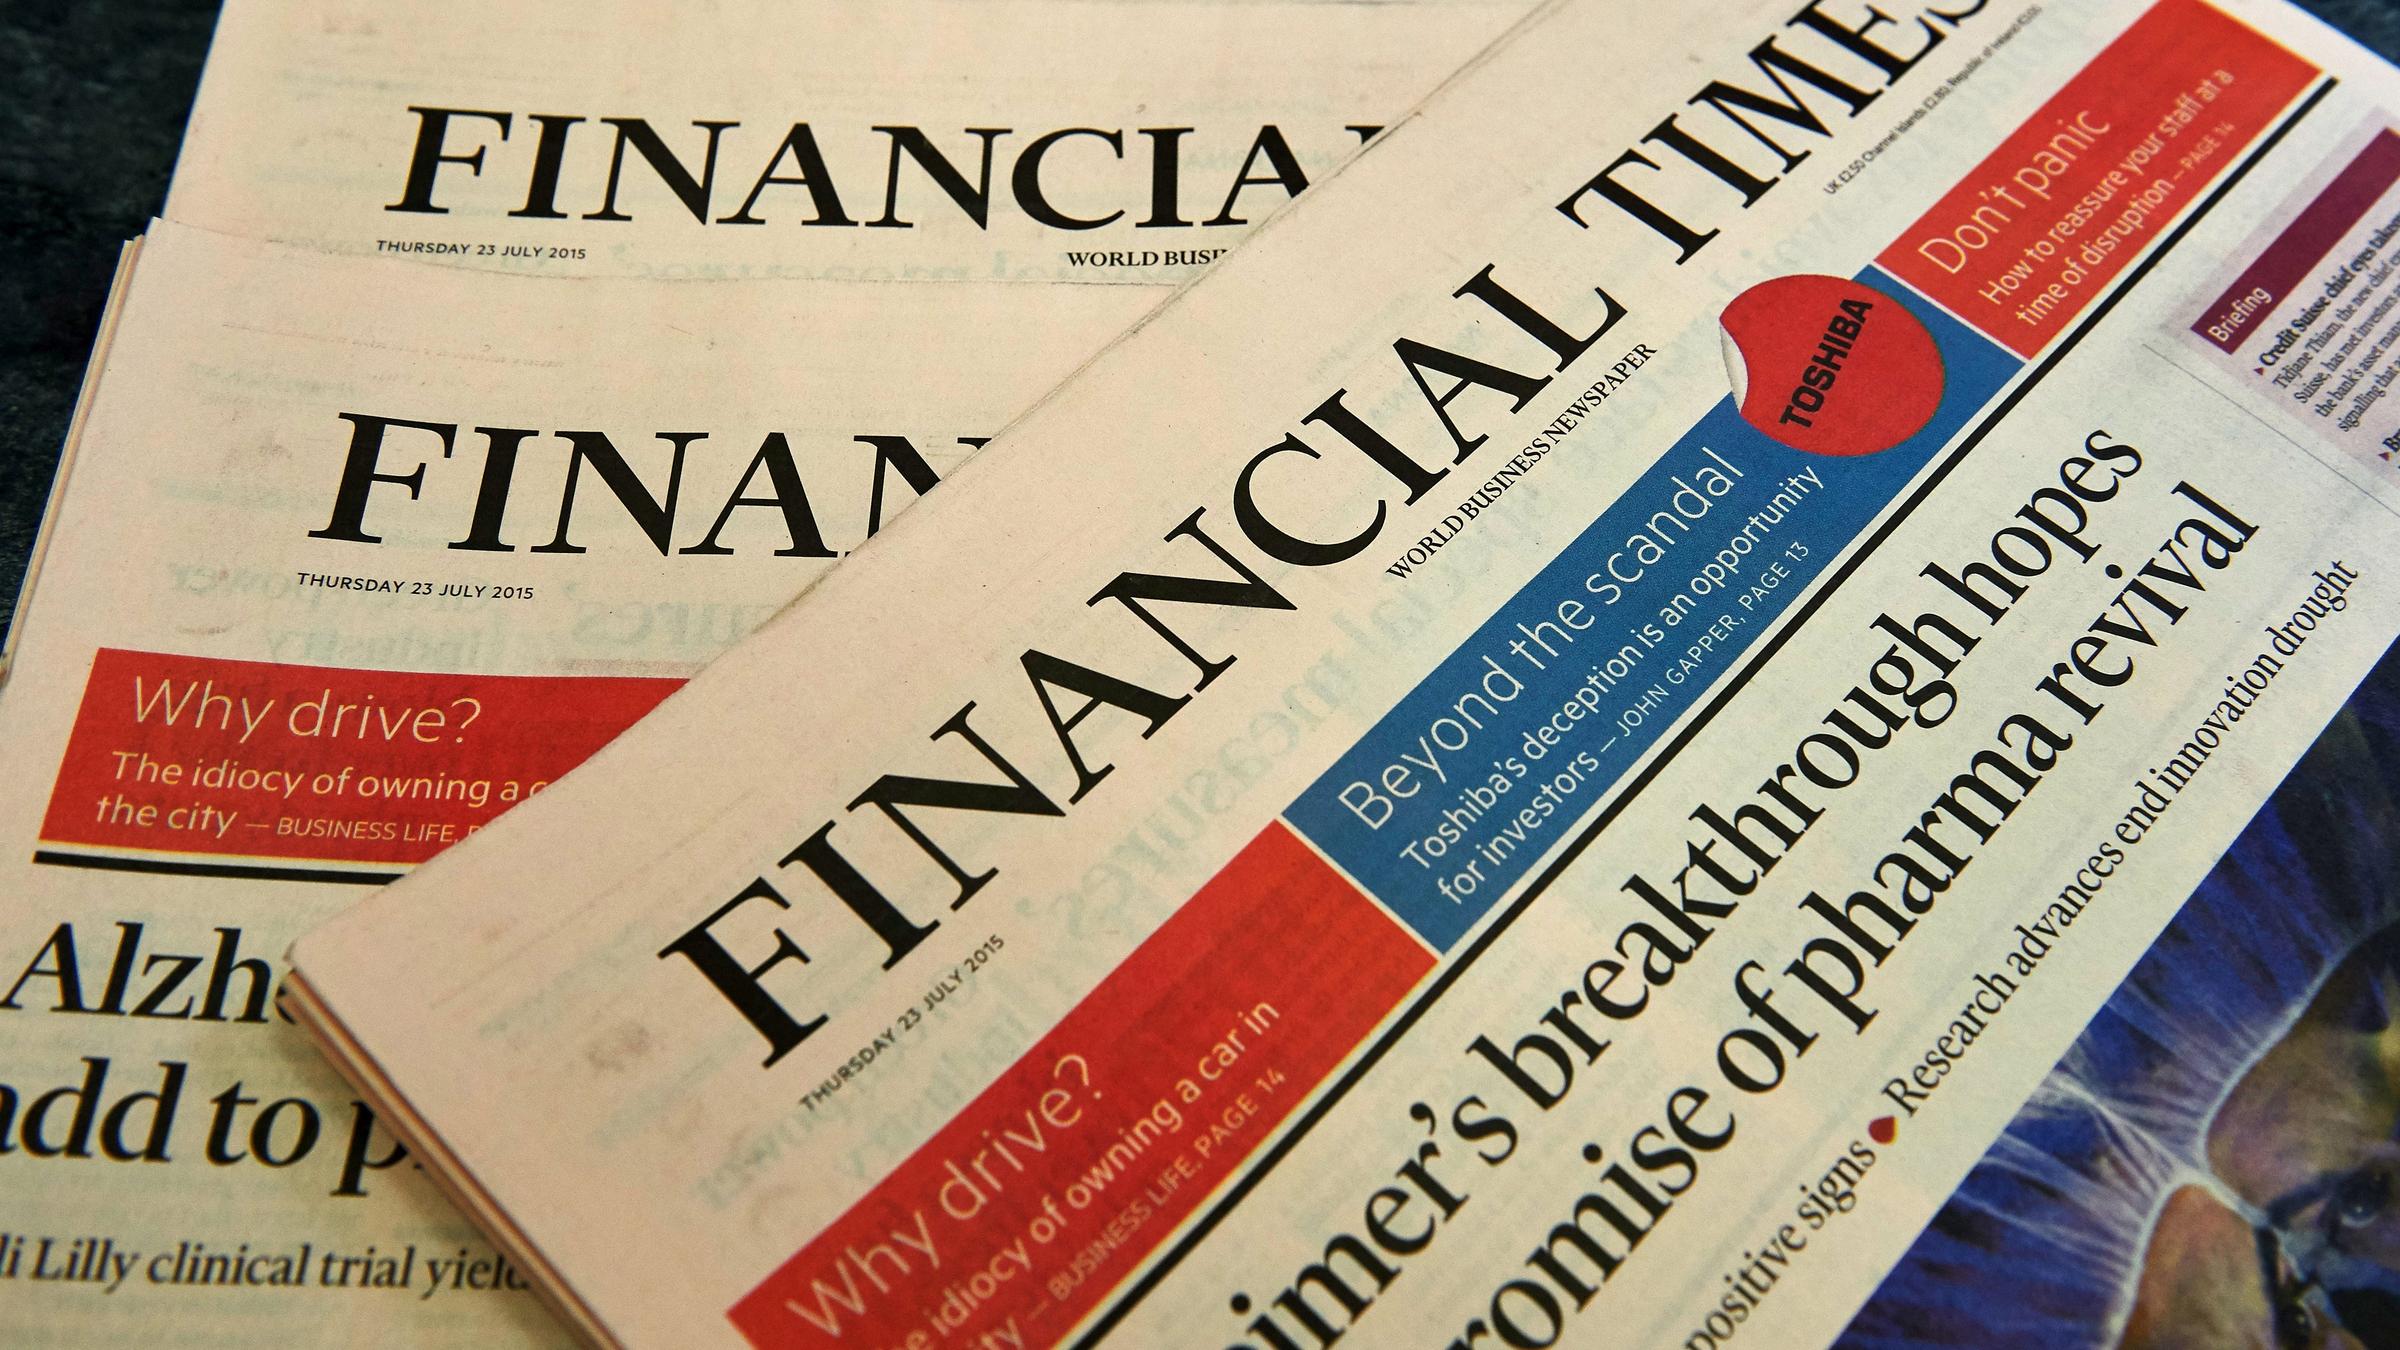 The Financial Times Group 14